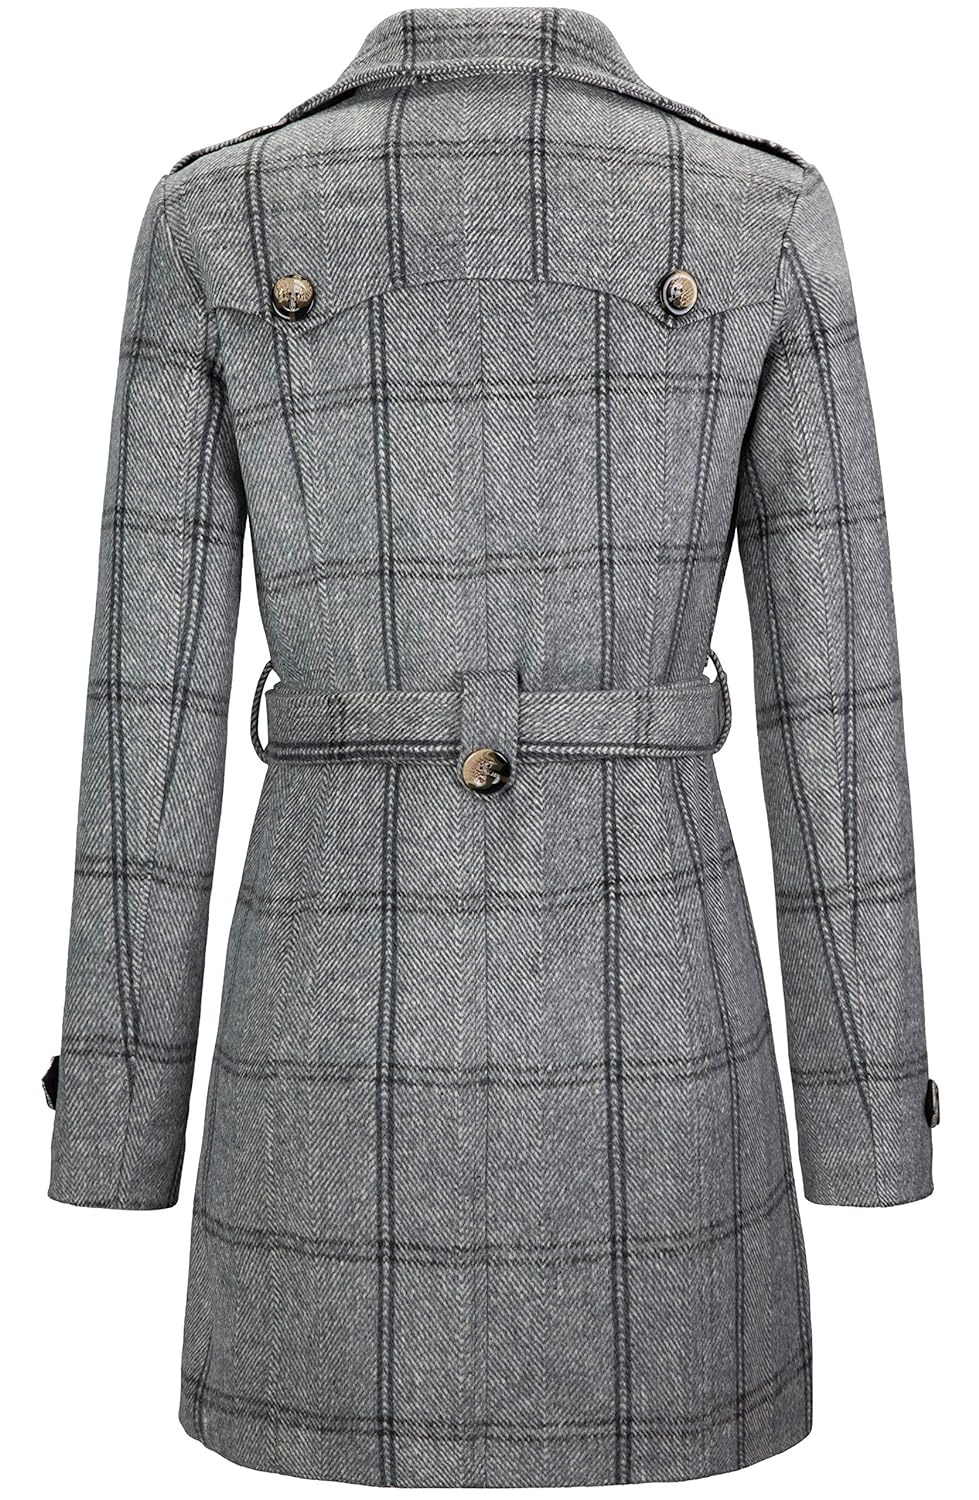 Wantdo Women's Slim Shaping Double Breasted Pea Coat with Belt Plaid L